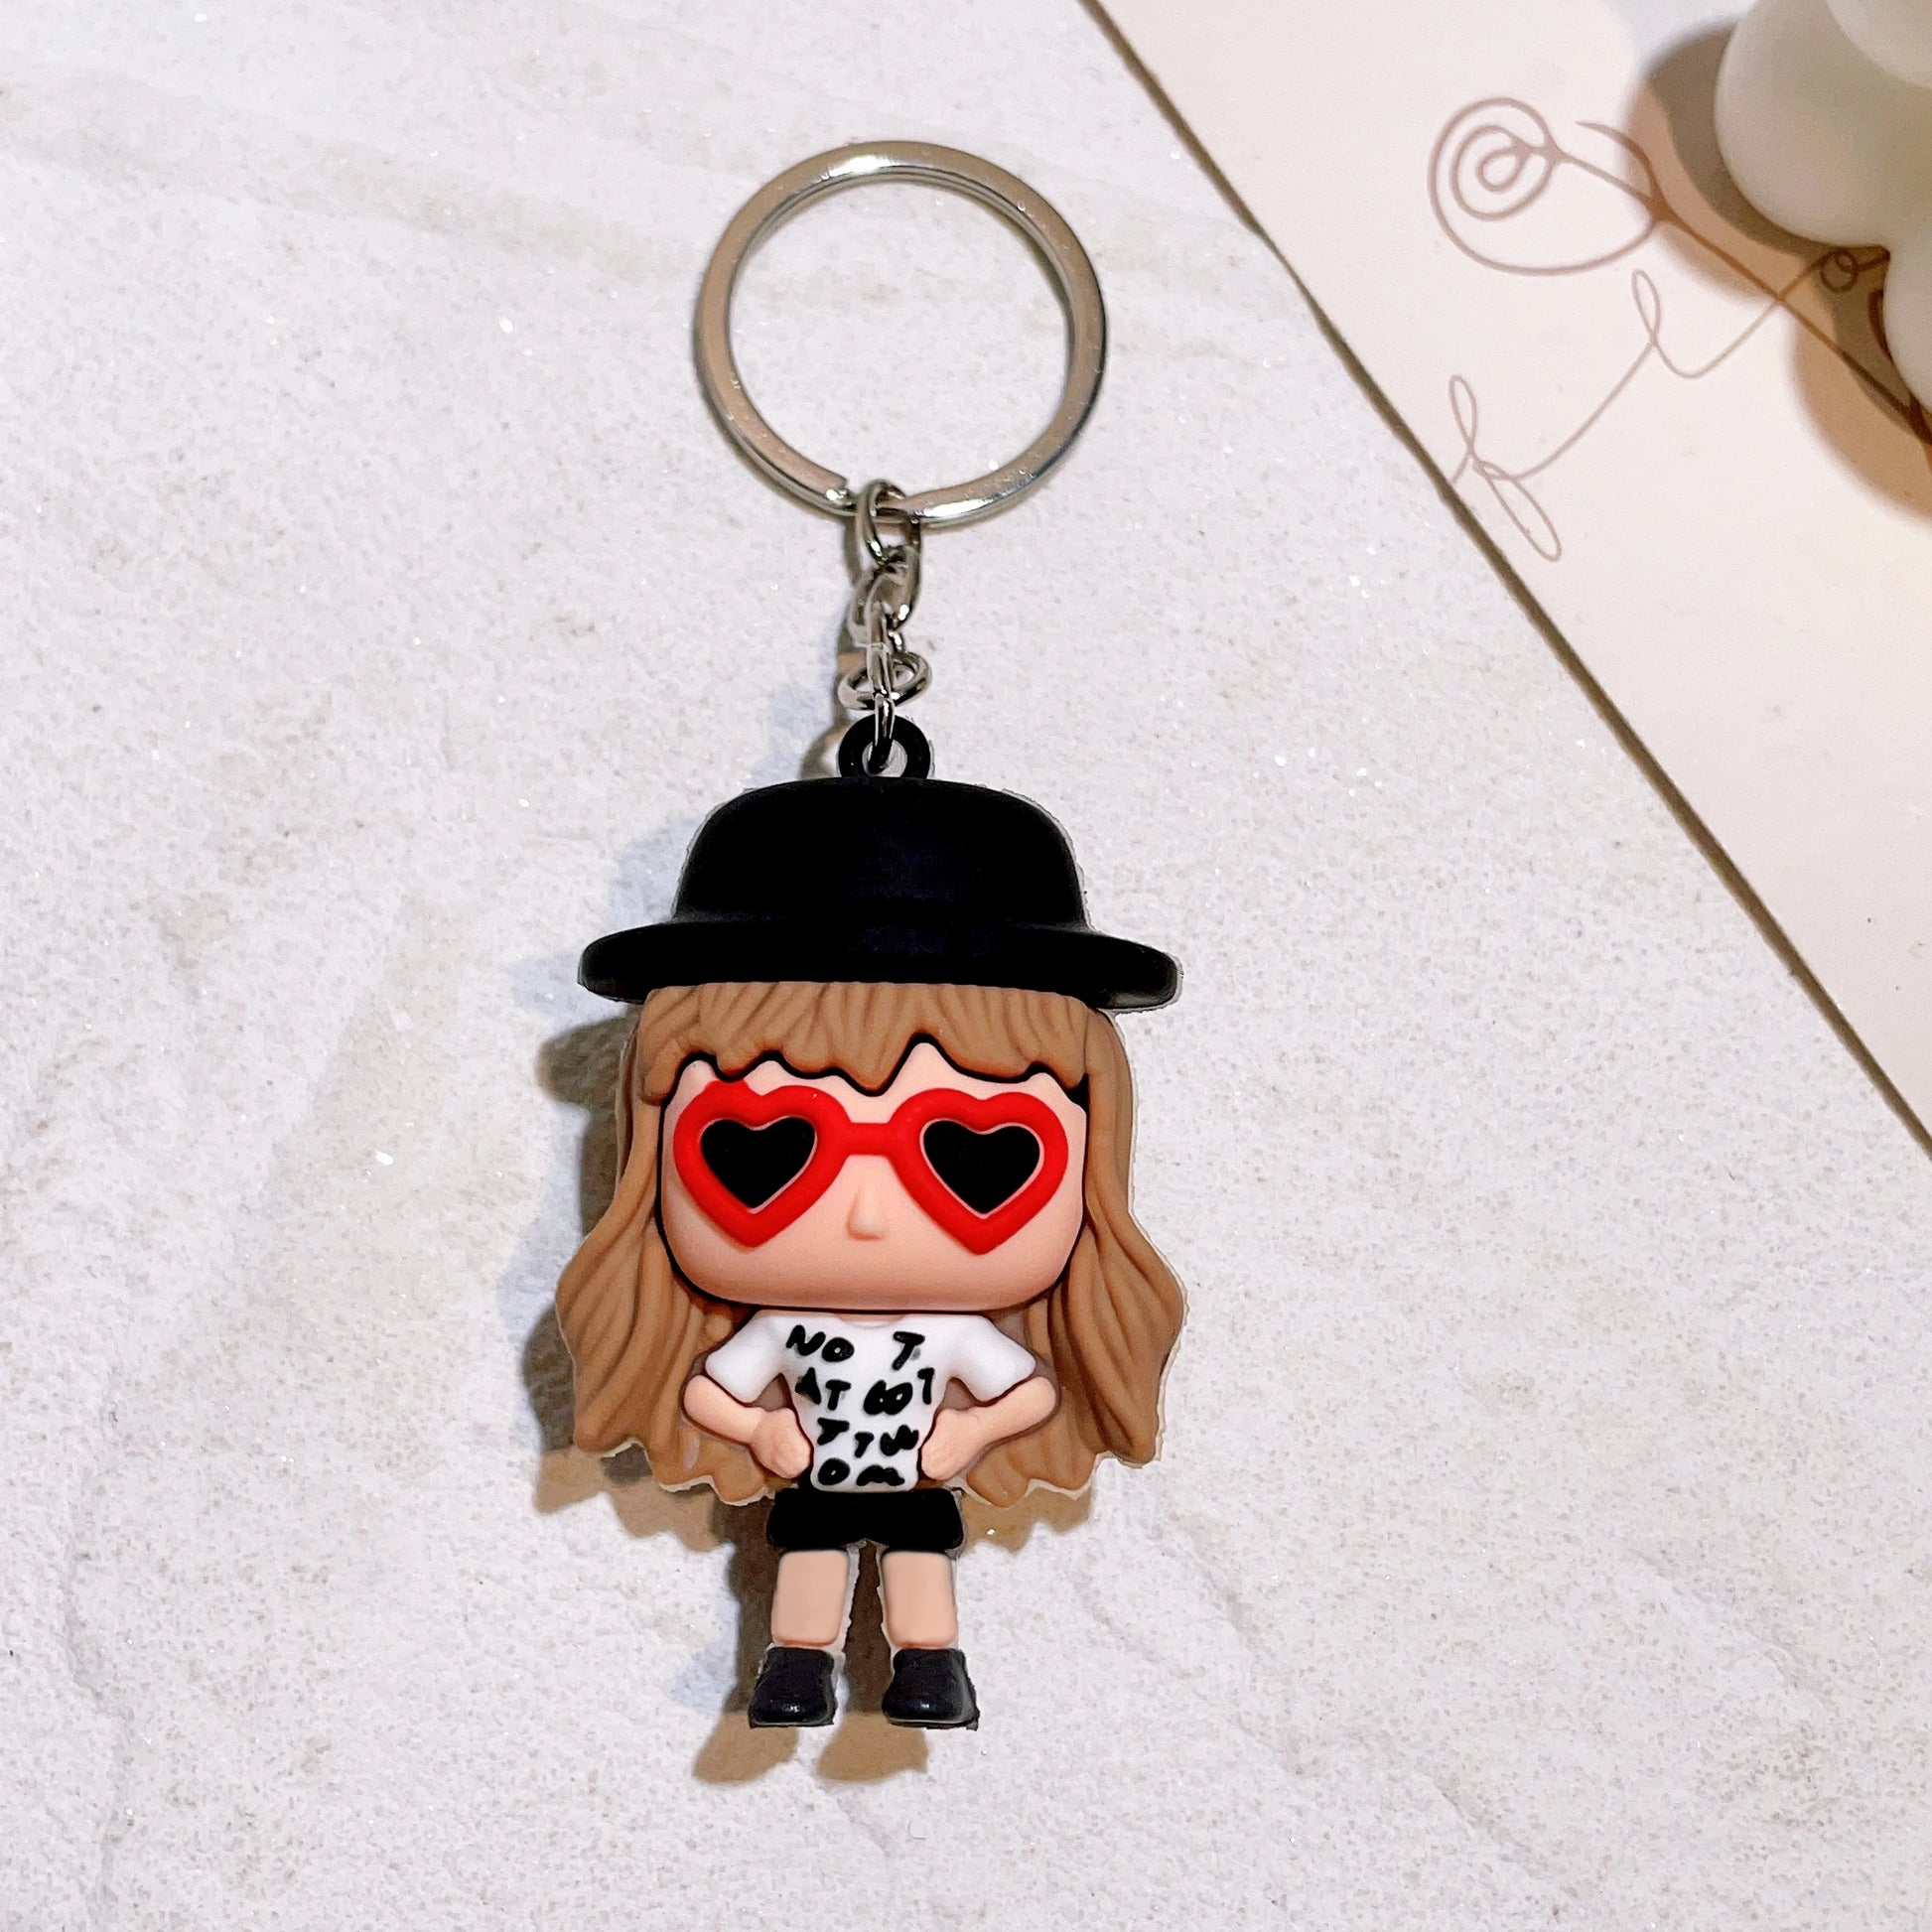 Singer Swift the Taylor Keychain Kawaii Taylor Guitar Music Notation Keyring Car Key Holder for Party Accessories Gifts 2 - ihavepaws.com